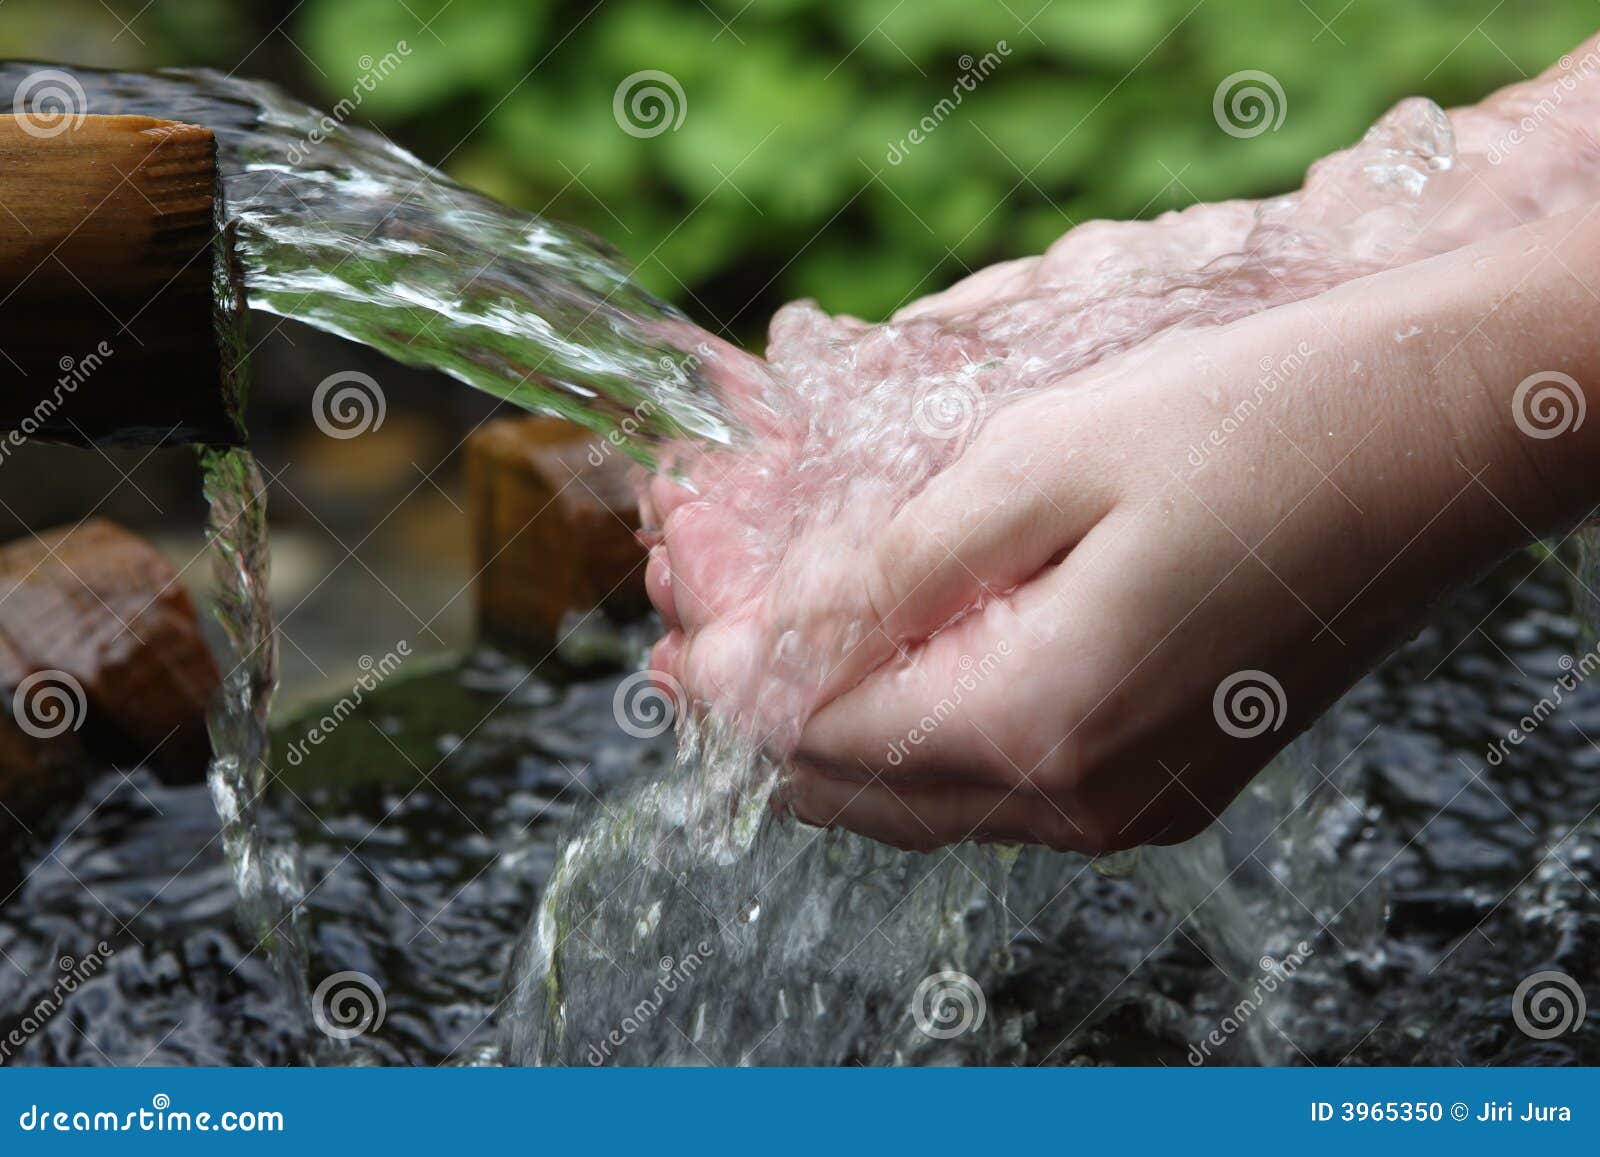 hands and fresh water